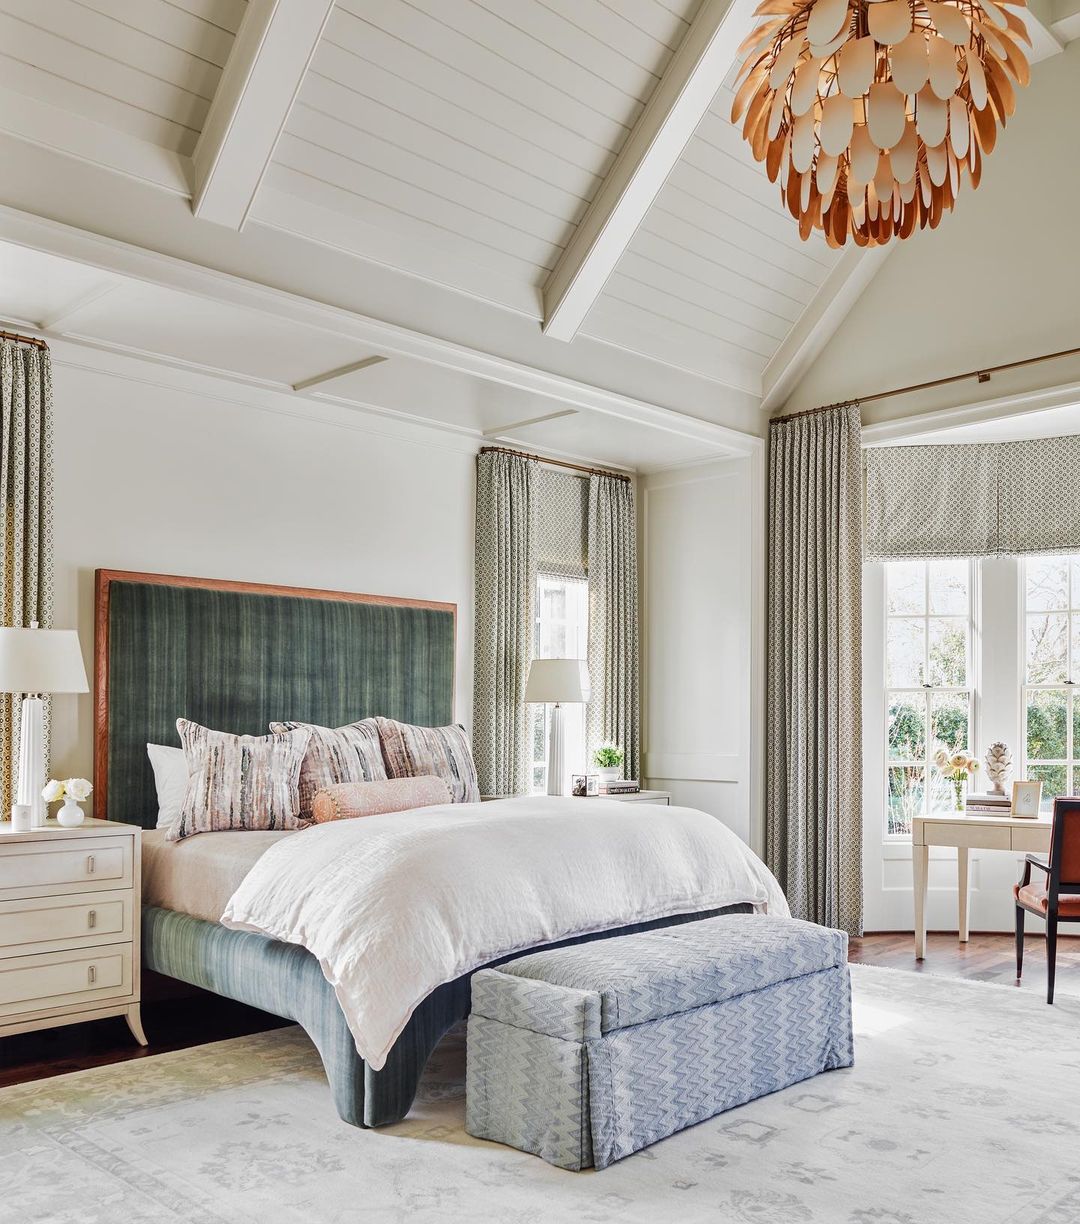 Textured Tranquility with a Modern Glow - Modern Farmhouse